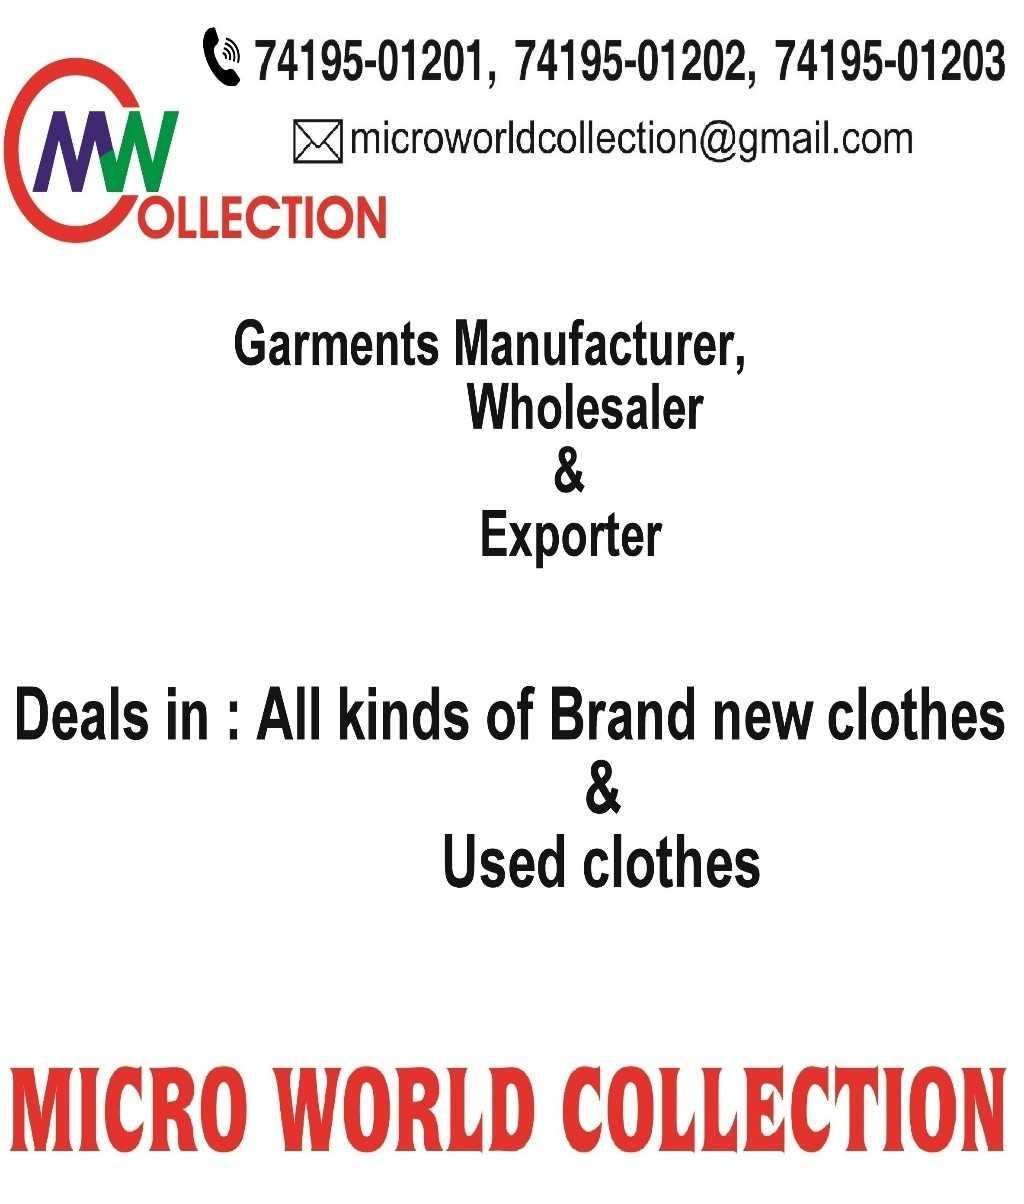 Micro World Collection